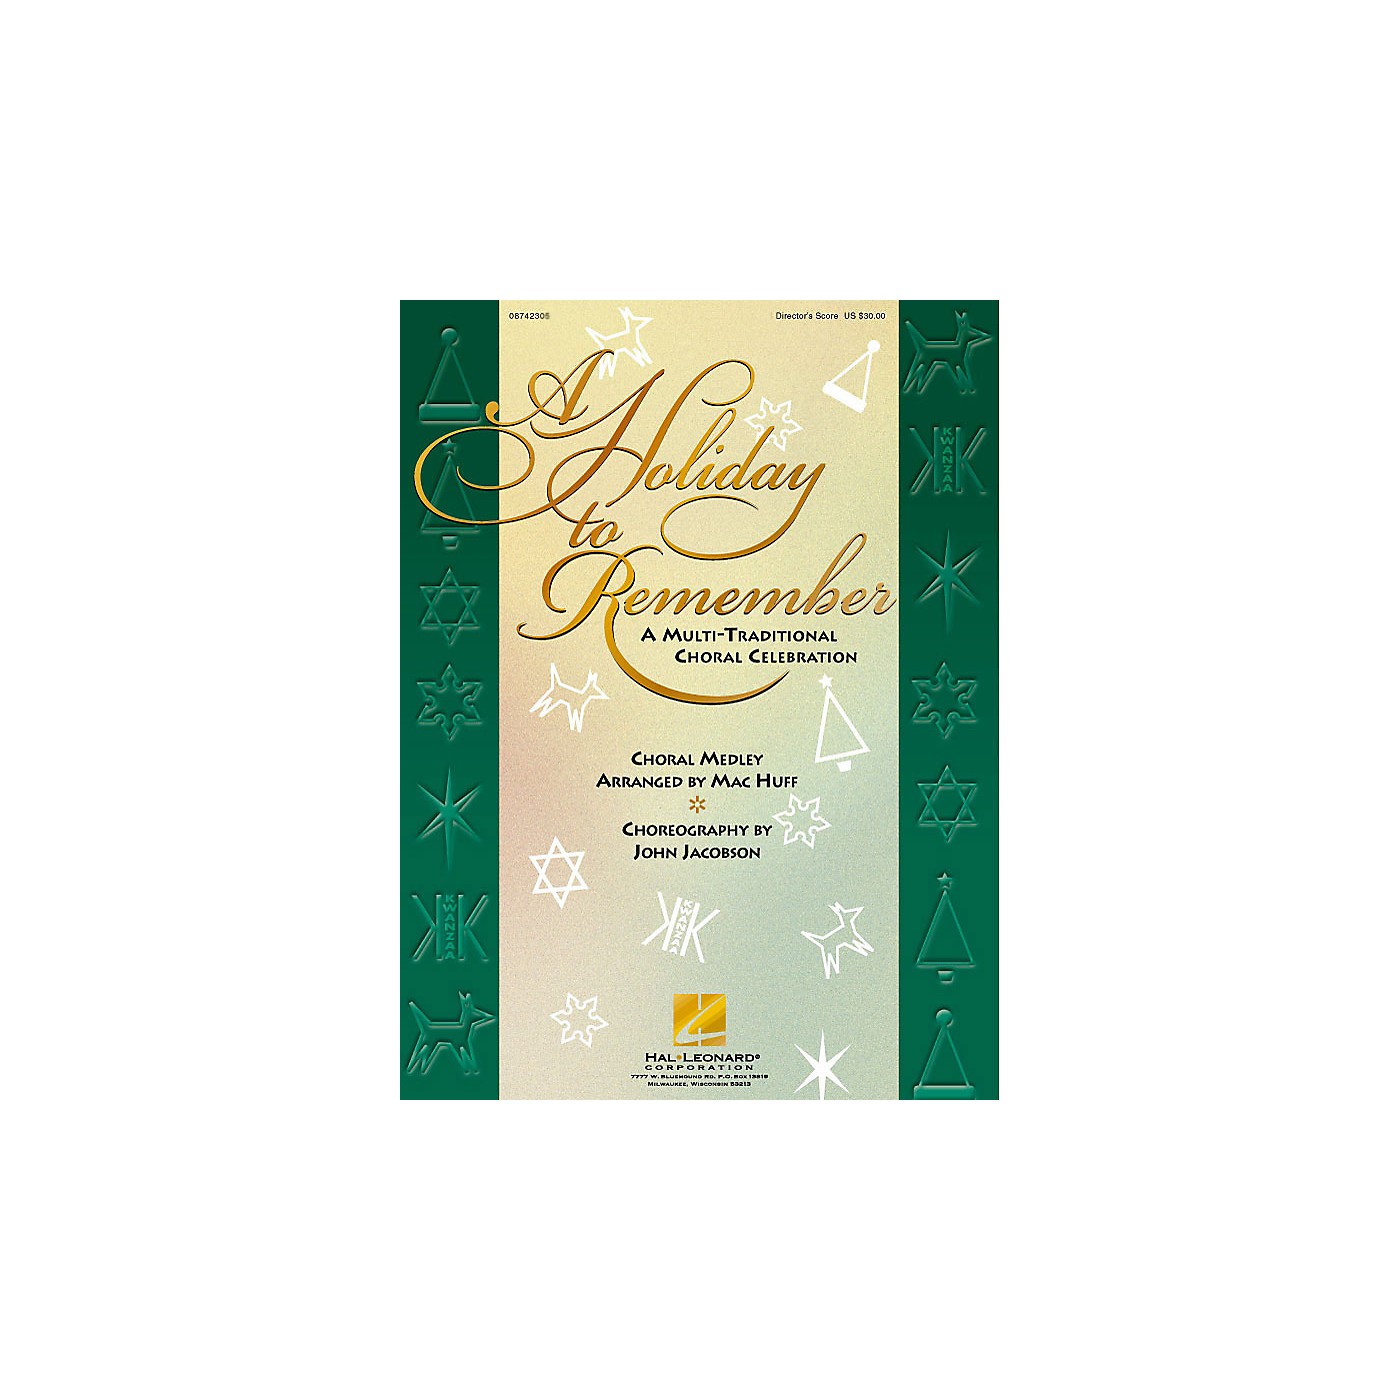 Hal Leonard A Holiday to Remember - A Multi-Traditional Choral Celebration (Medley) 2-Part Score arranged by Mac Huff thumbnail